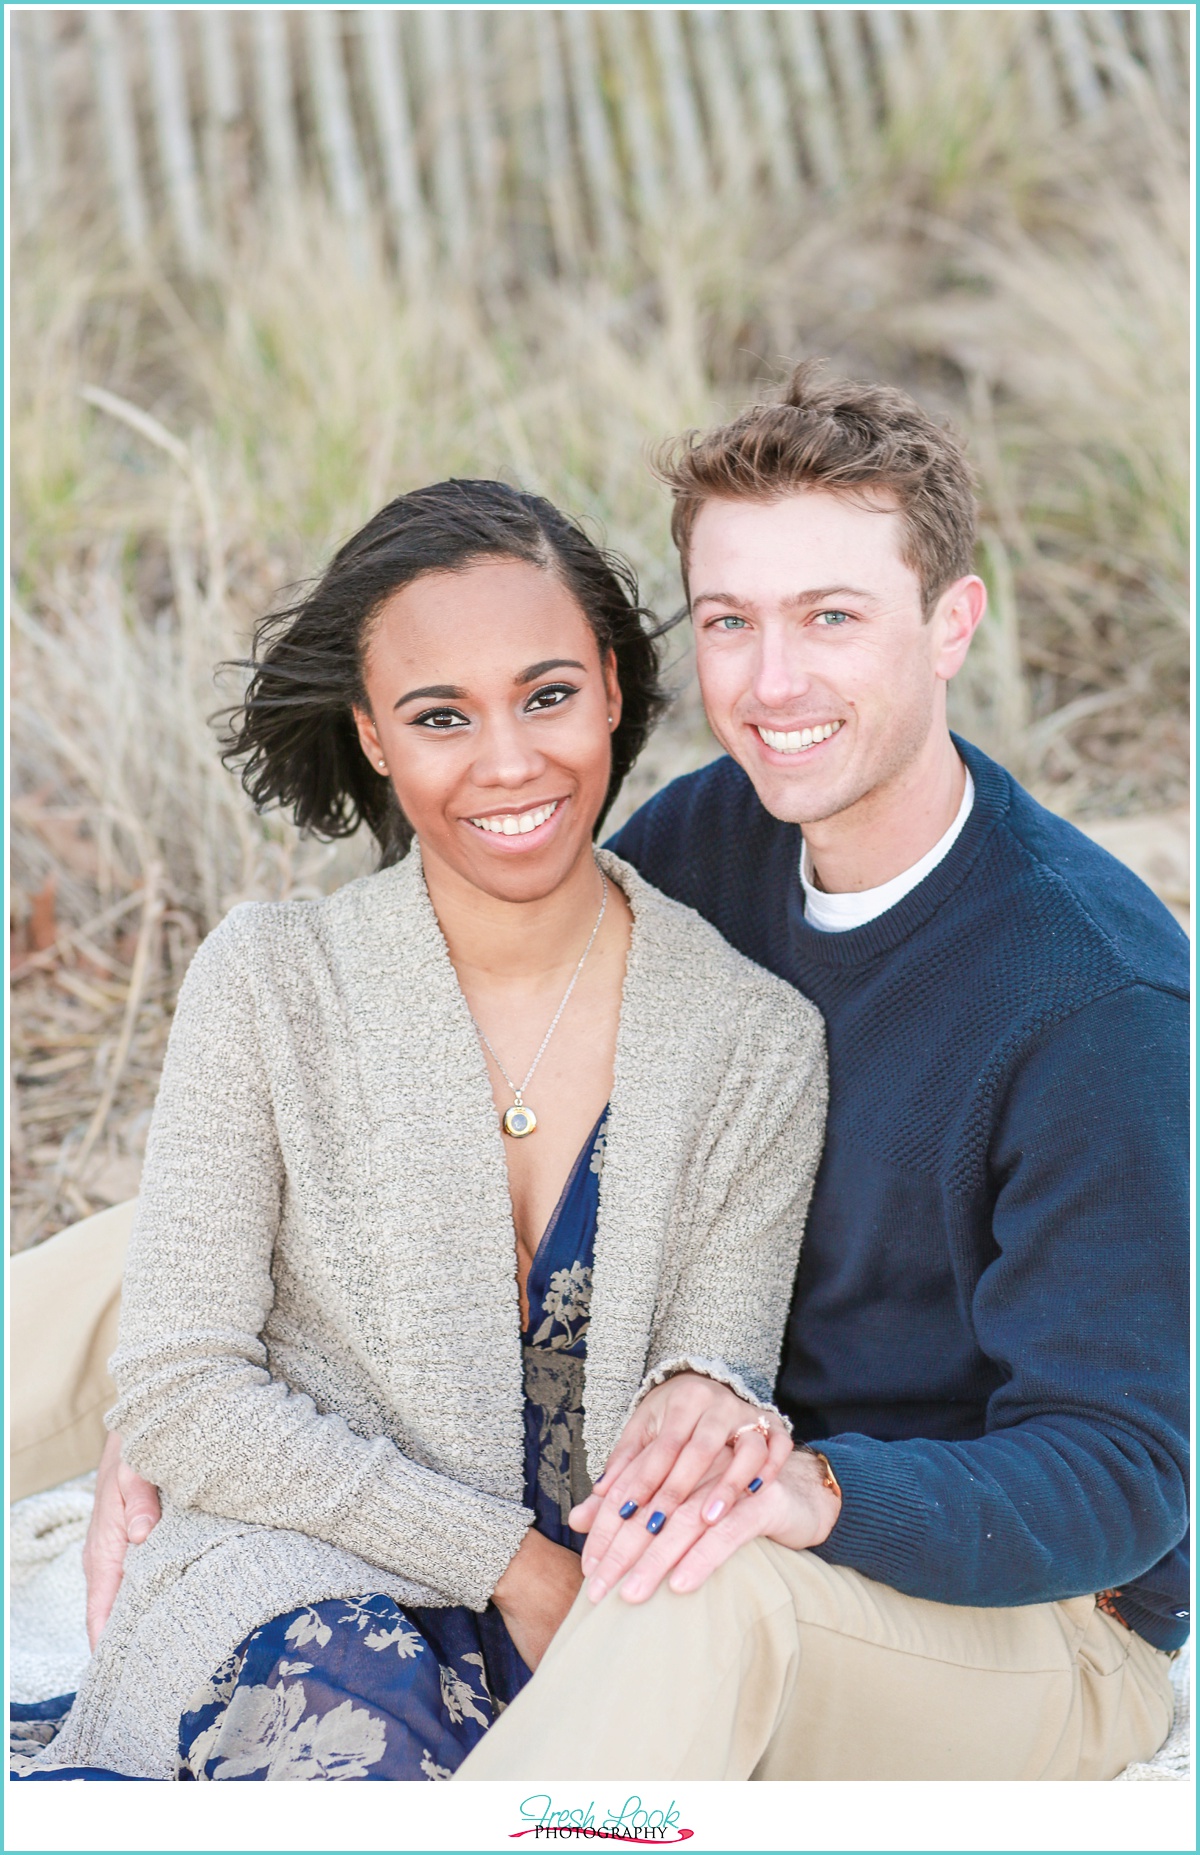 Windy Virginia Beach Engagement Session